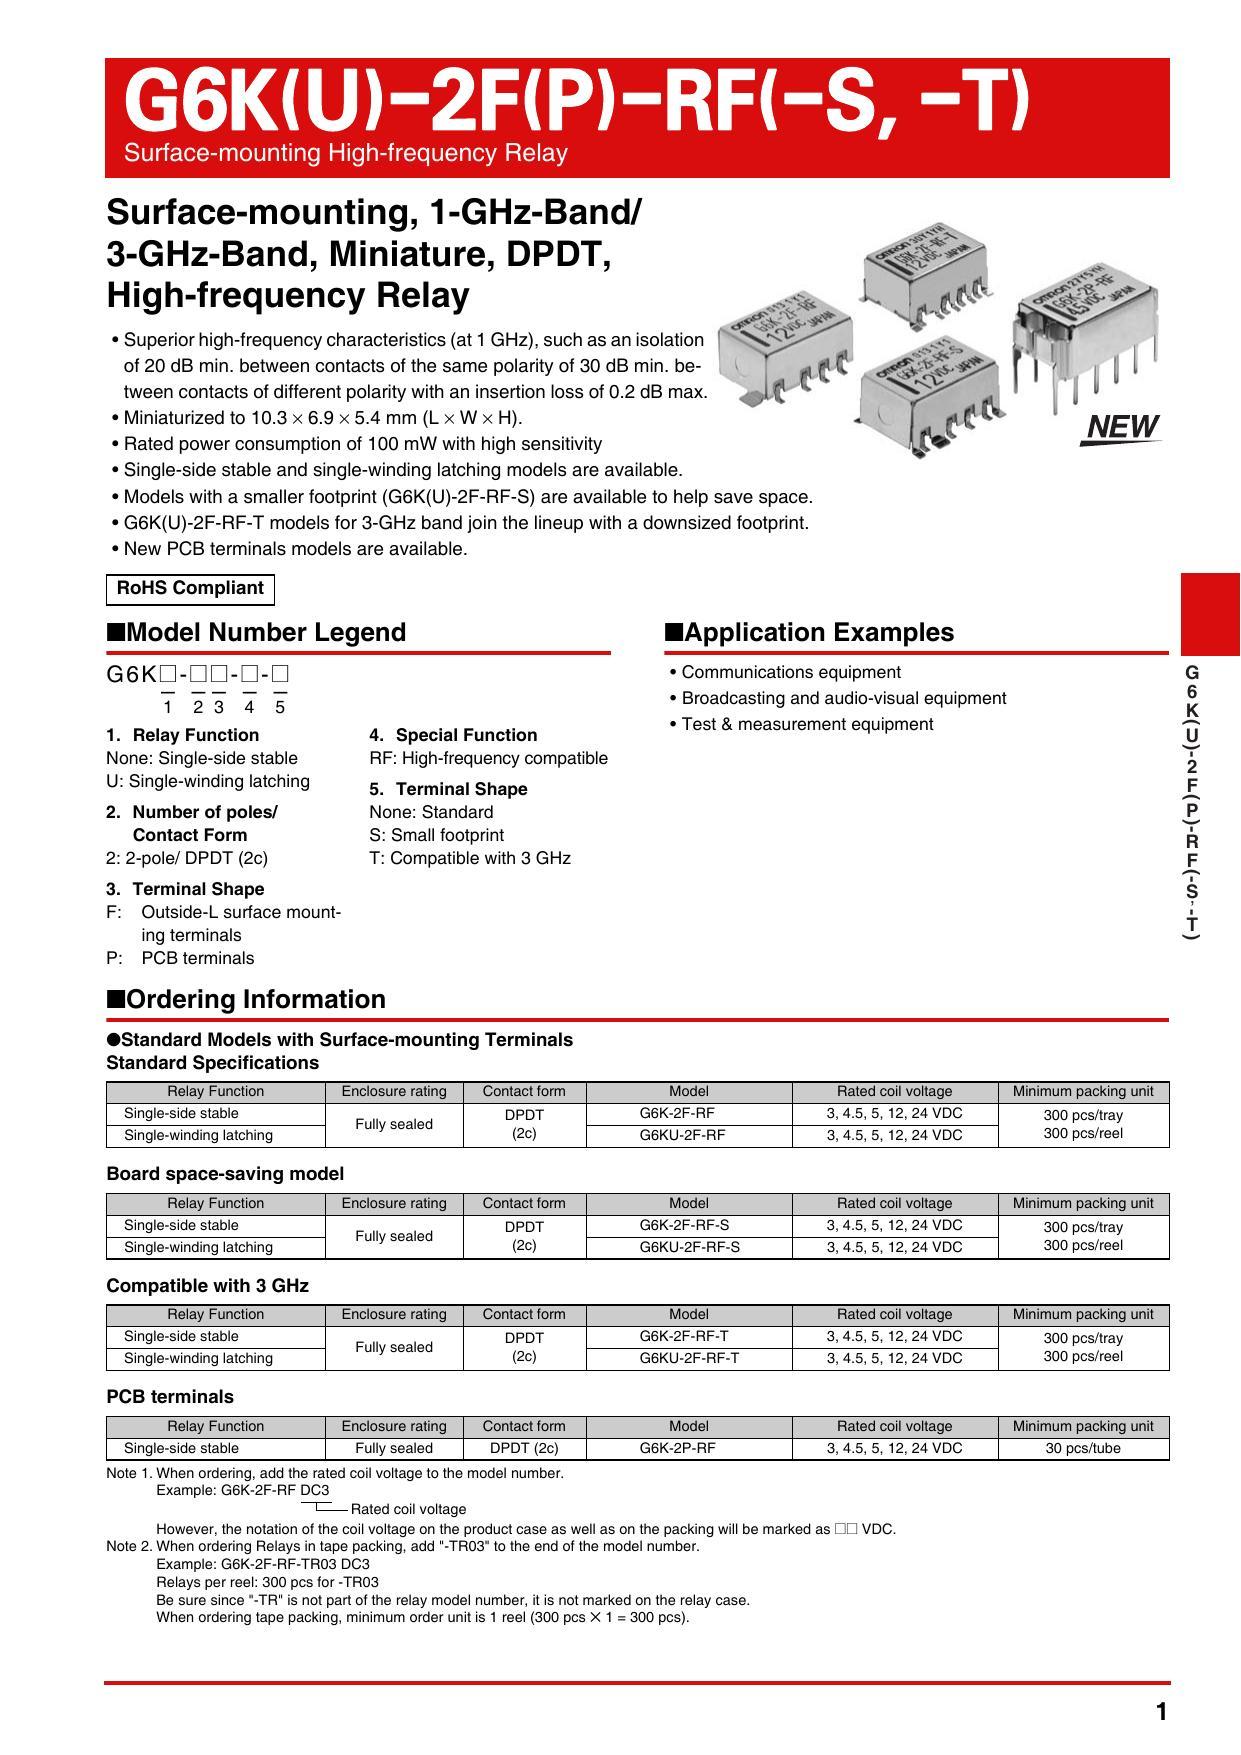 g6ku-2fp-rf-s--t-surface-mounting-high-frequency-relay.pdf